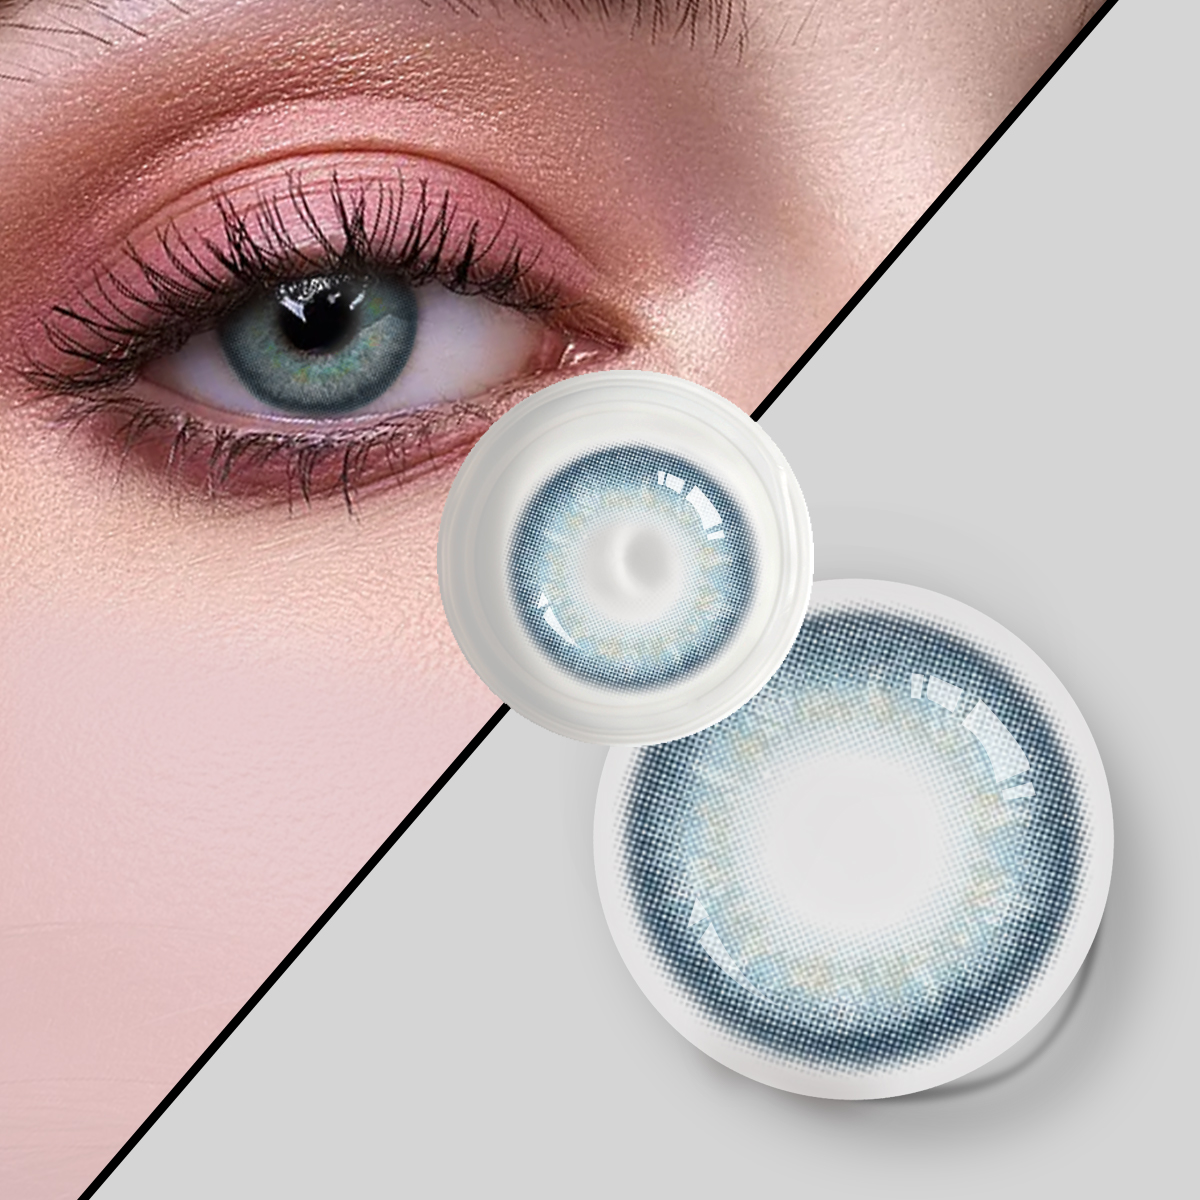 Remover Yearly Makeup blue finest color top in Dark eyes Plano color contact lenses from china